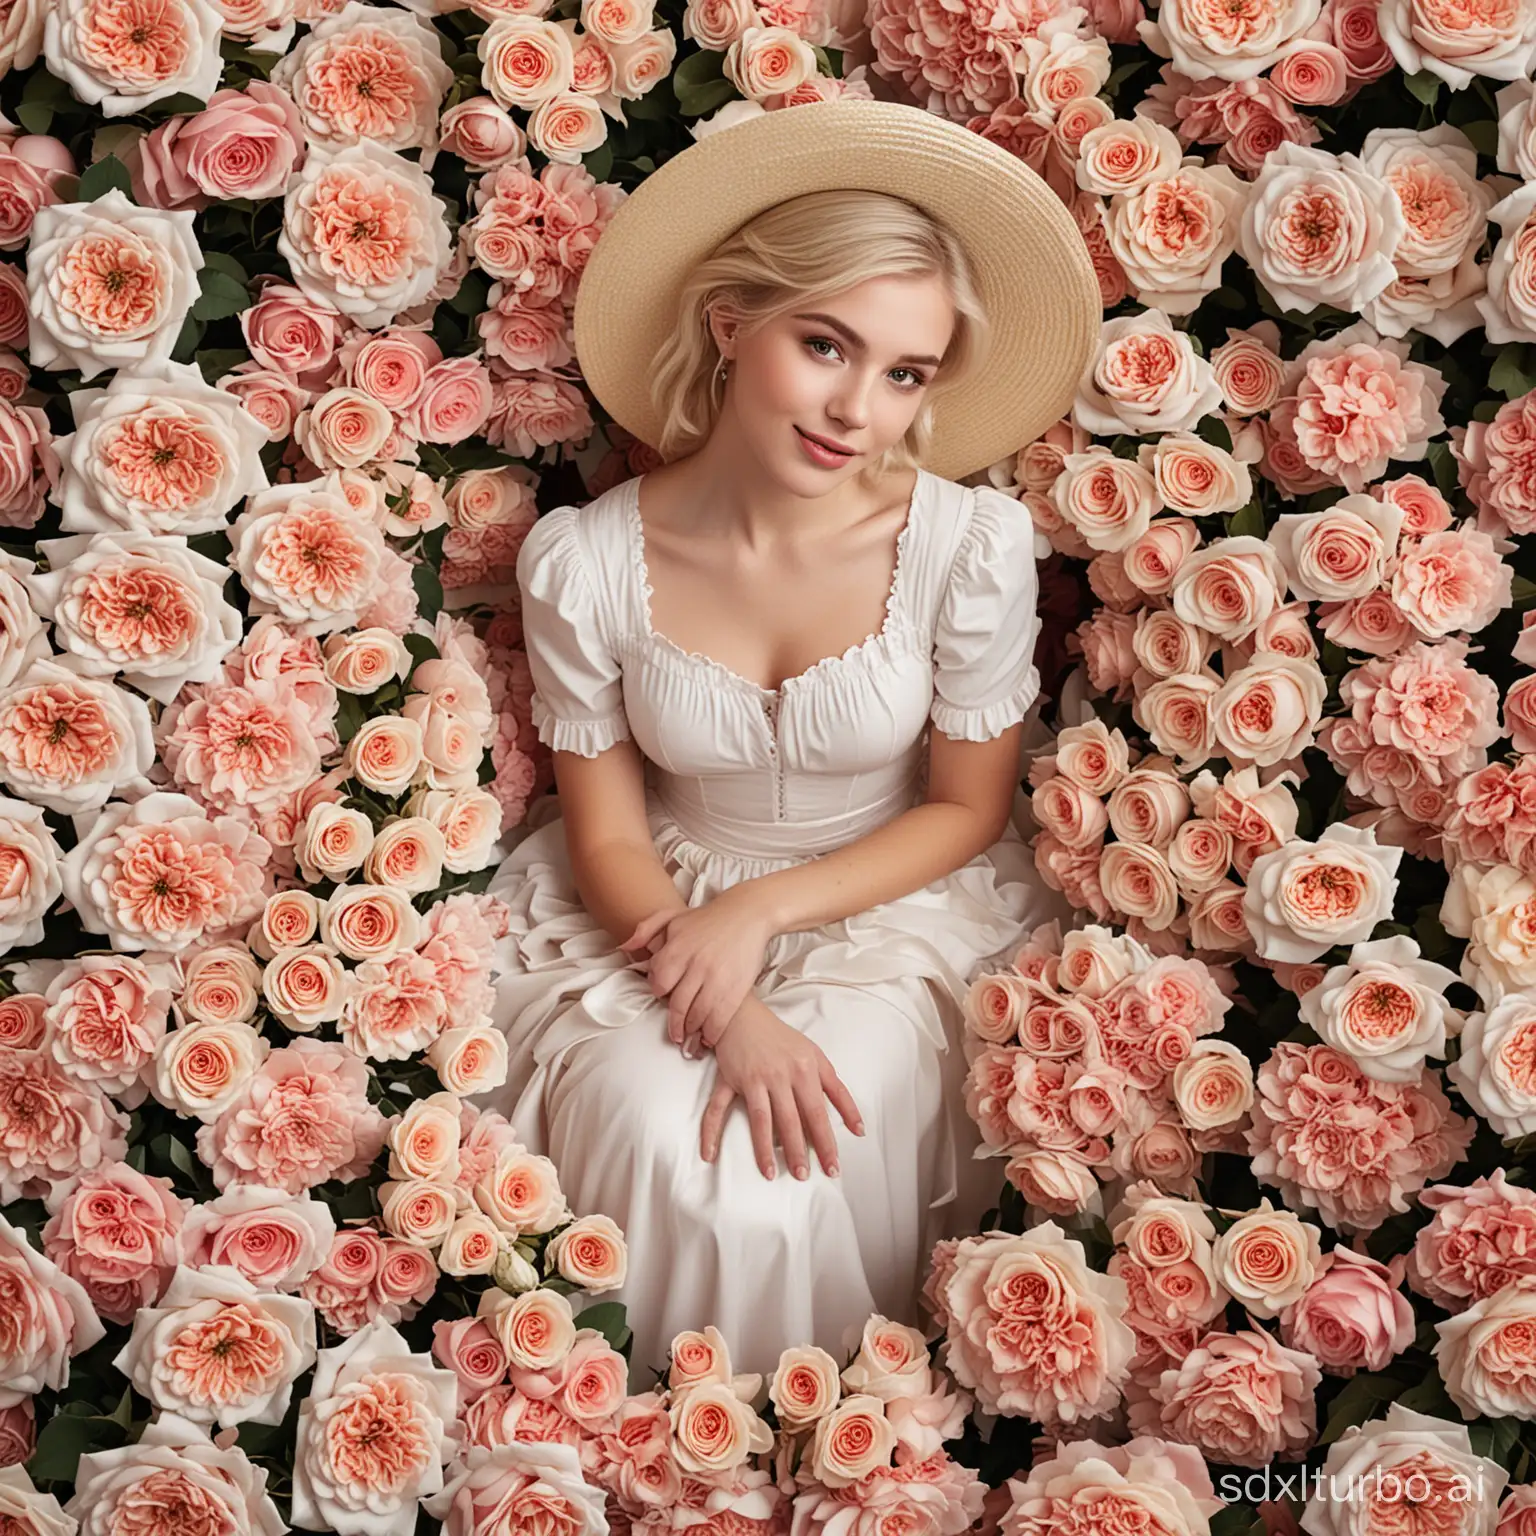 WhiteSkinned-Girl-Surrounded-by-Bouquets-in-Hatboxes-with-Roses